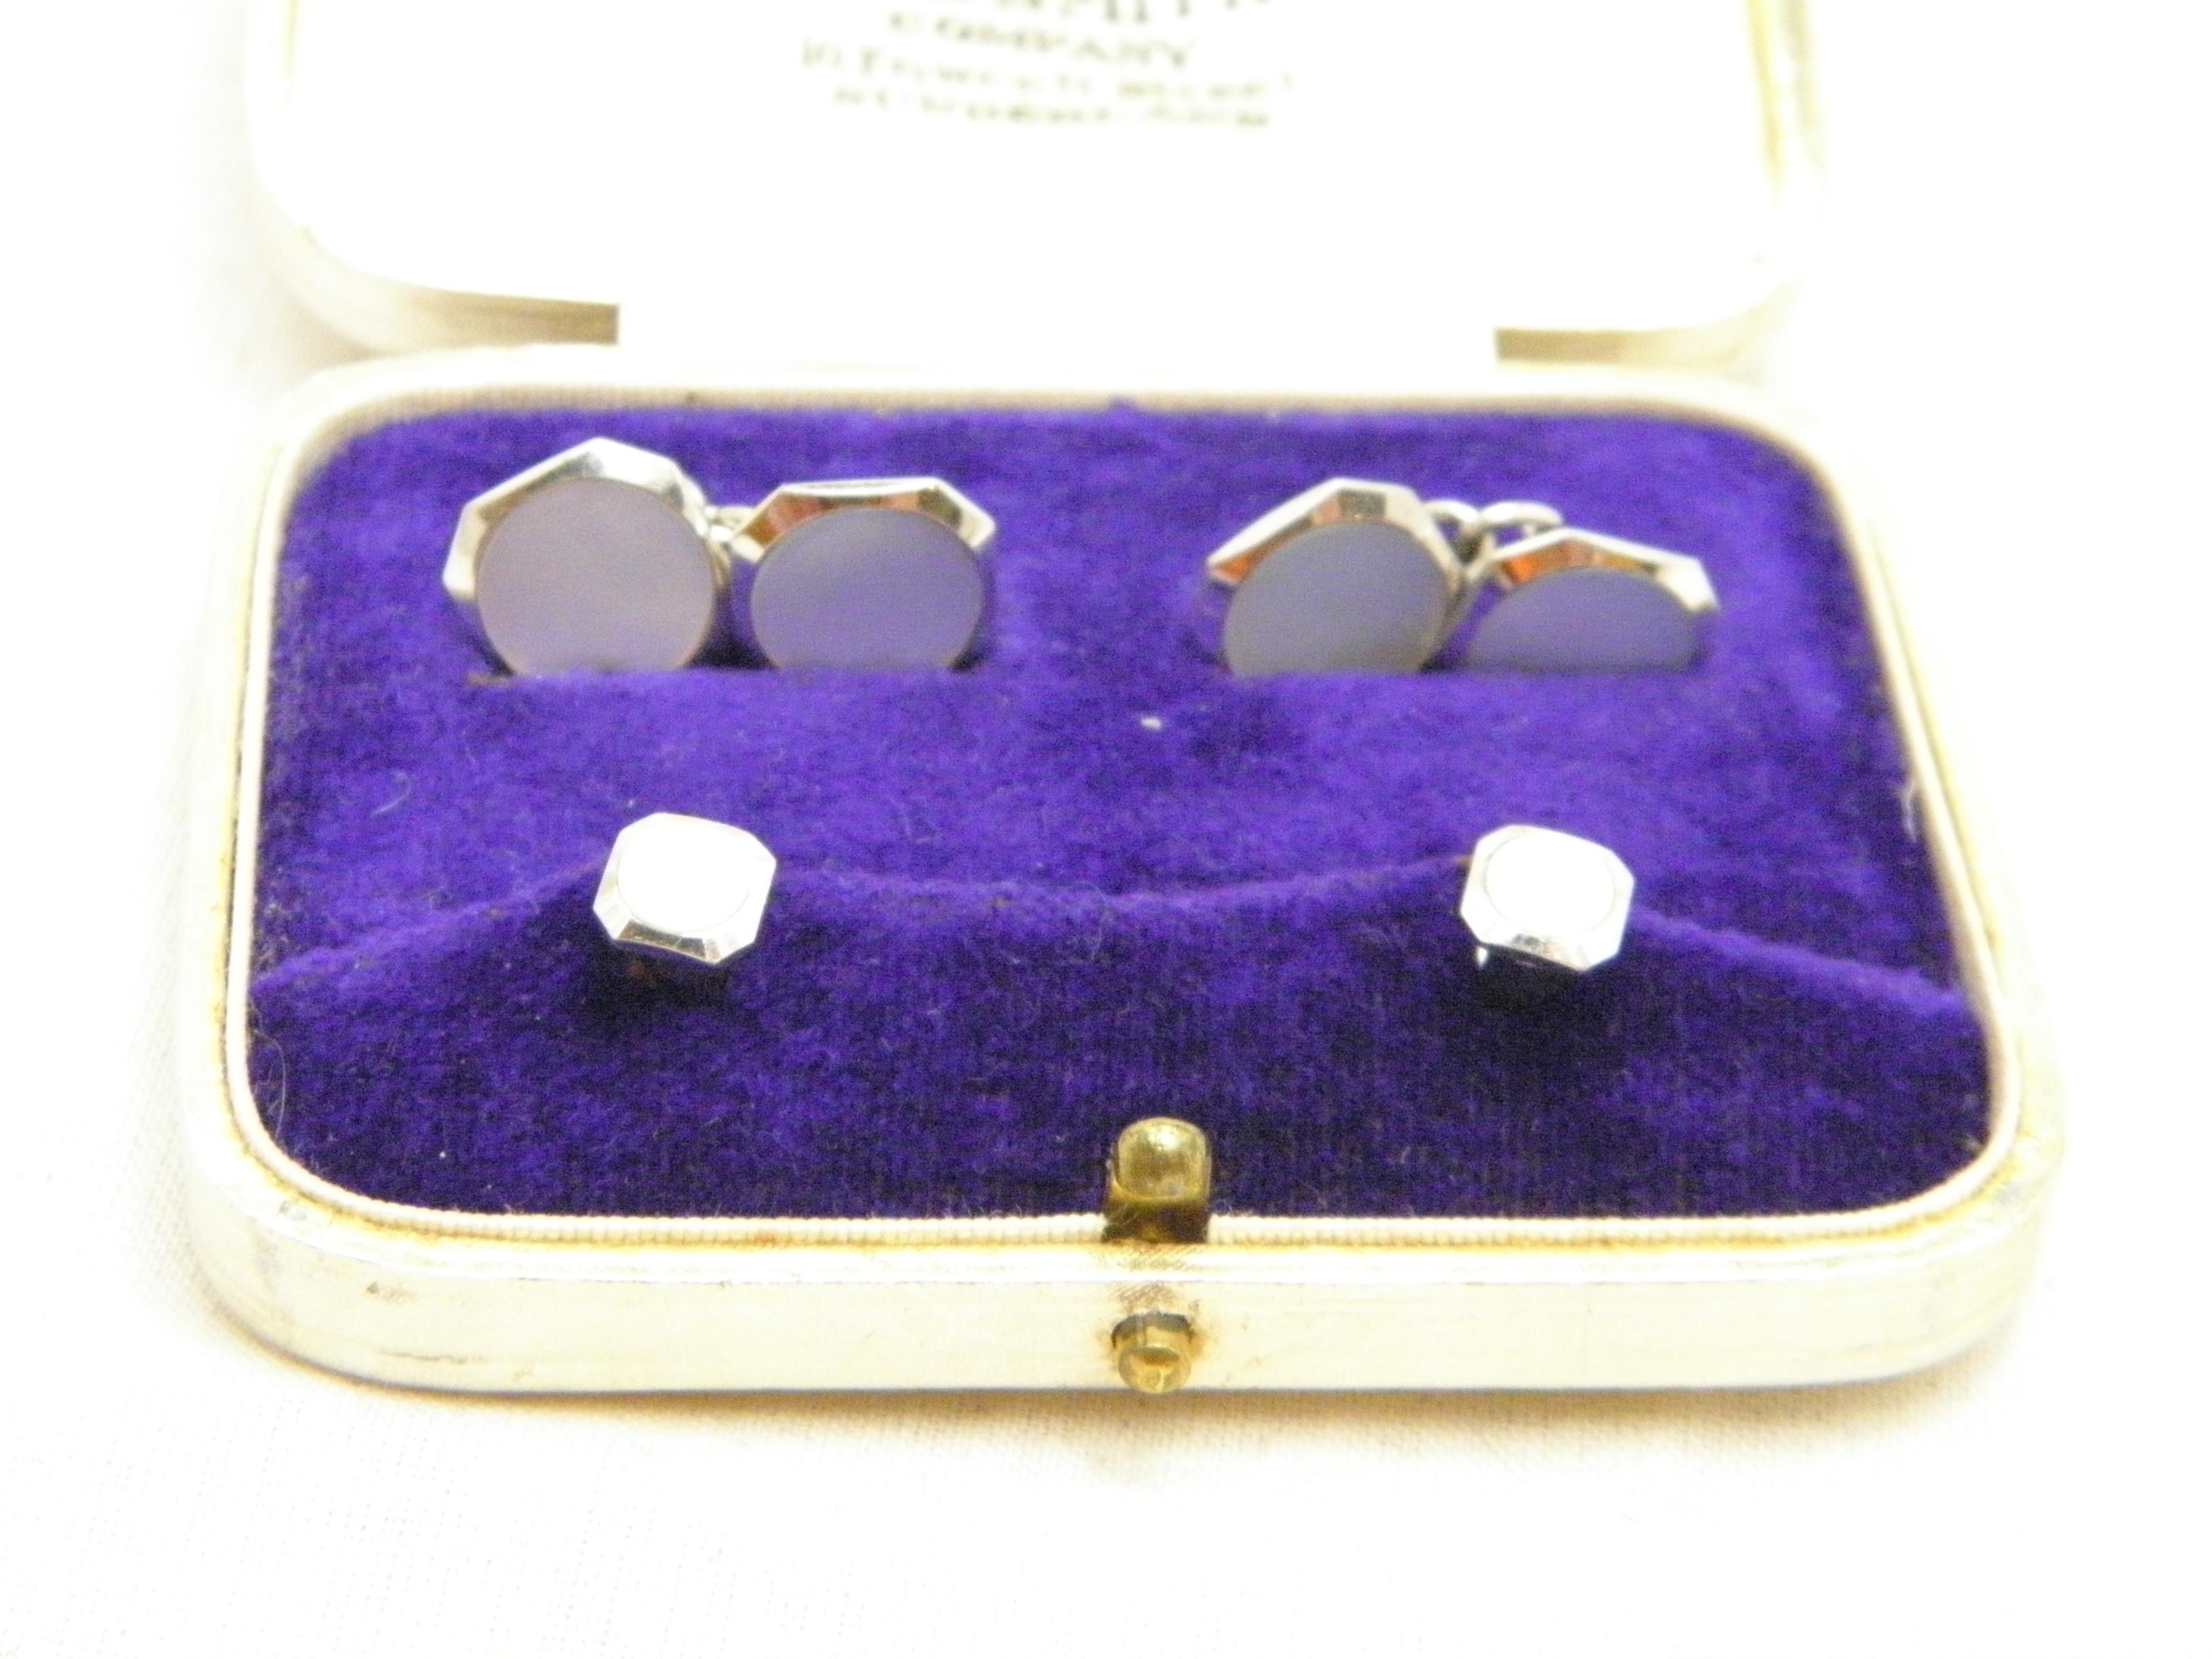 Vintage 9ct White Gold Cufflinks Collar Stud Set 375 Purity Heavy 8.2g Cuff Link For Sale 8